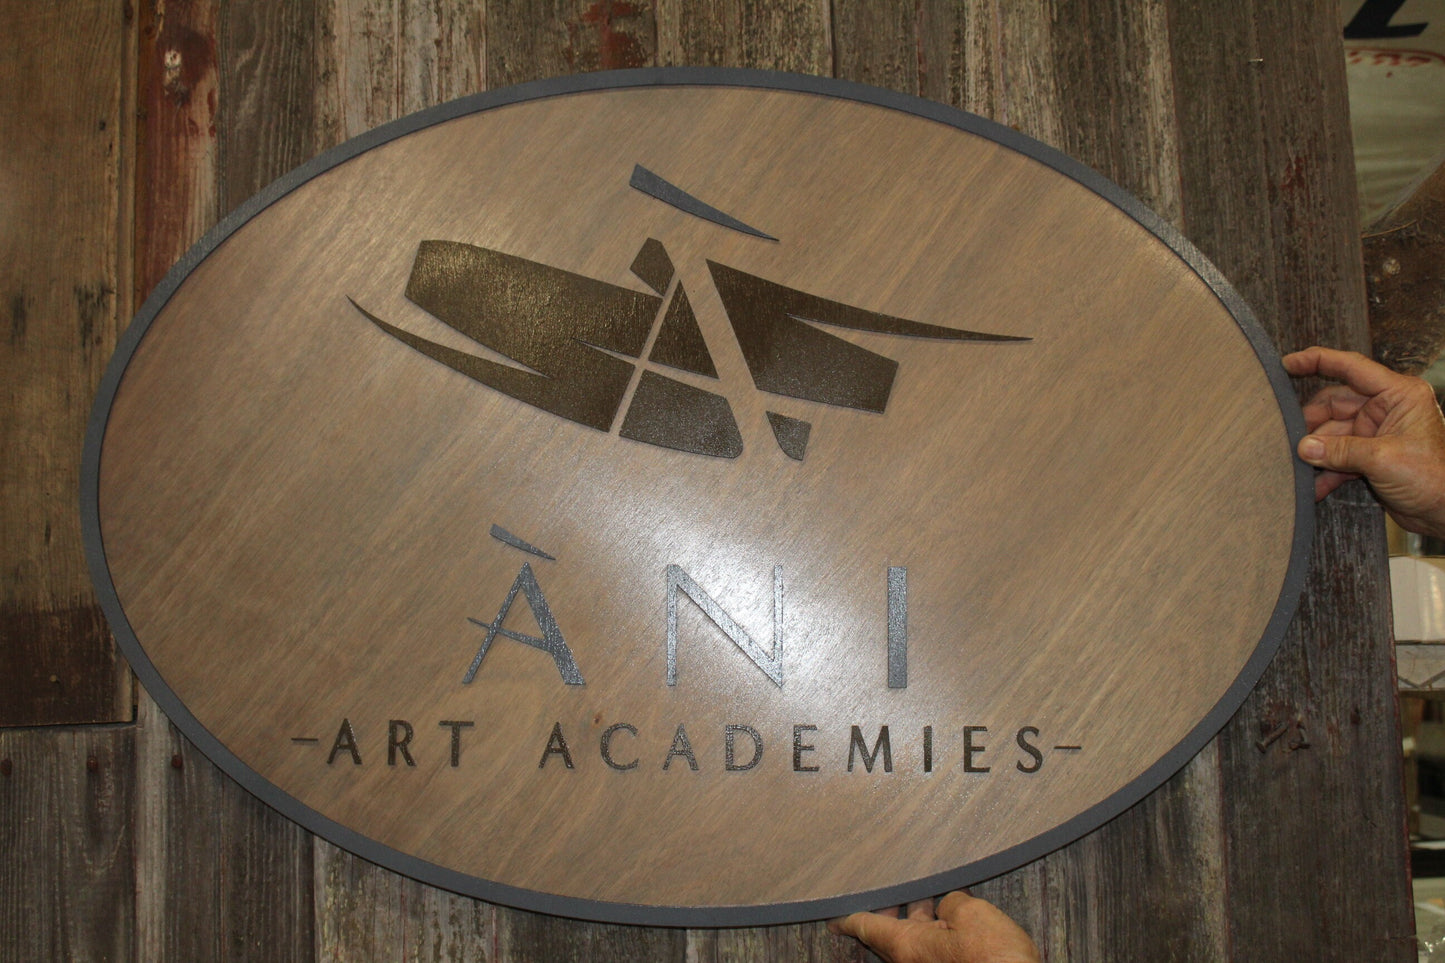 Wooden Oval Custom Sign Logo Raised 3D Elevated Letters Made to Order Art Academy Signage Schooling Blue Campus Business Technical Degree